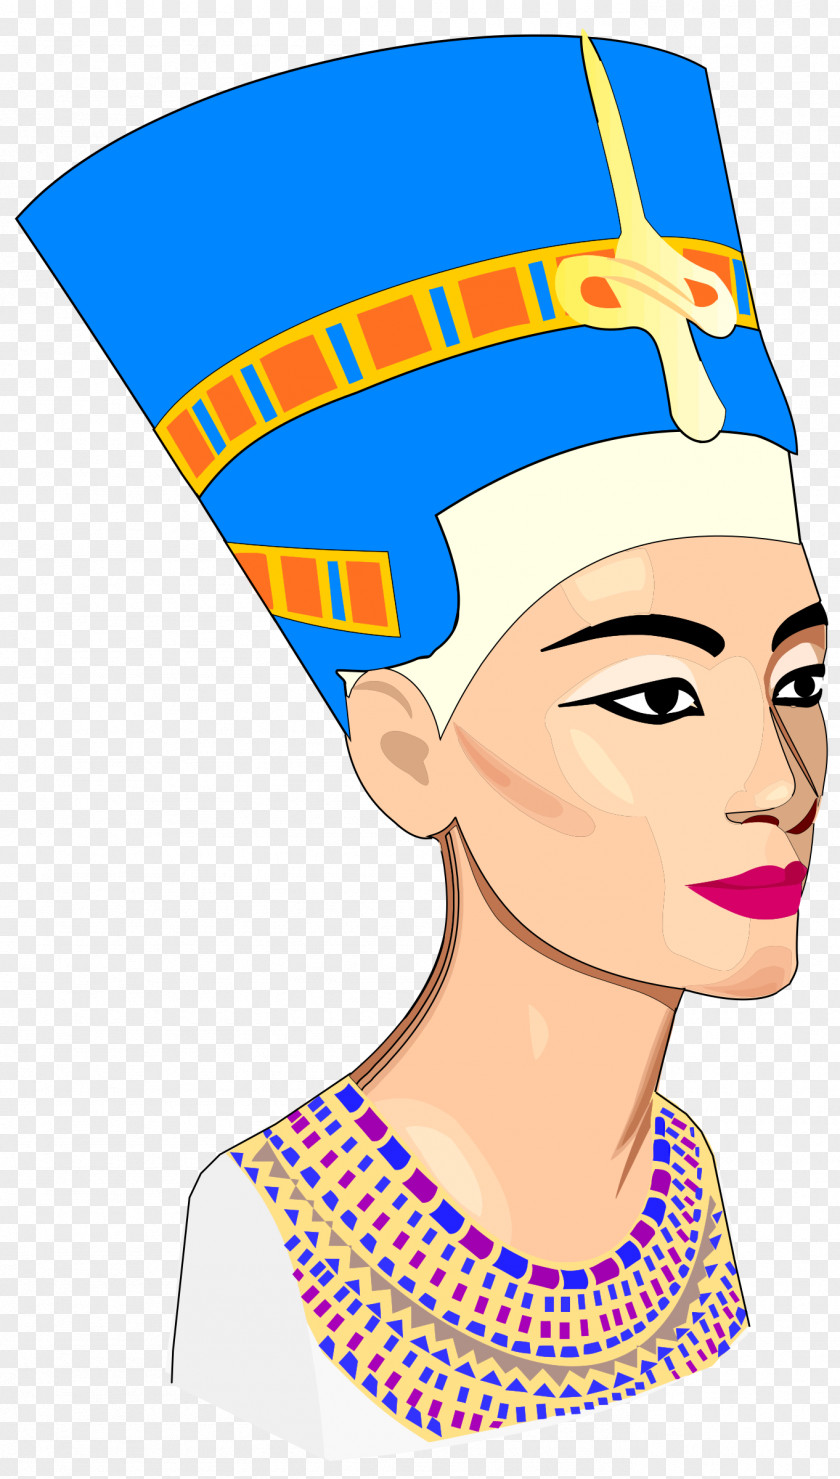 Nefertitti Sign Nefertiti Bust Egyptian Museum And Papyrus Collection Ancient Egypt Clip Art PNG